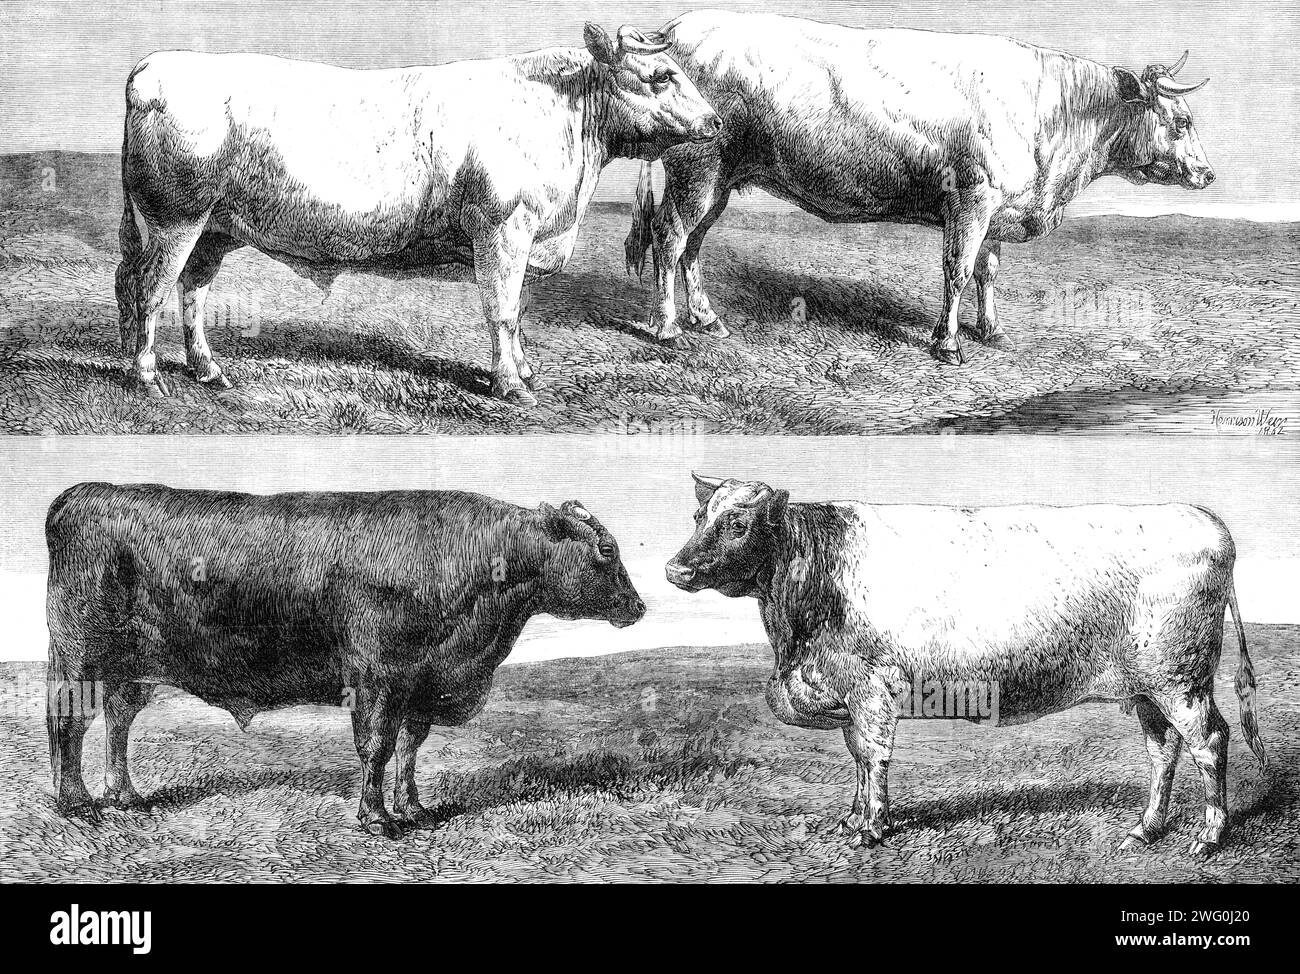 The International Cattle Show at Poissy, 1862. Engraving from photographs by M. Richebourg, photographer to the French Government. 'M. Bouton de Leveque's prize of honour Durham ox; Mr. M'Combe's prize of honour Aberdeen ox, winner of the Prince Albert prize; M. Le Vicomte Benoit d'Azy's first prize Charolaise cow; Lady Emily Pigot's prize of honour cow, Empress of Hindostan, winner of the Great Gold Medal...Mr. M'Combie's black ox swept off the ordinary gold medal (the first prize in his class) and the great gold medal of honour for steers, and the Prince Albert Cup as the best beast in the y Stock Photo